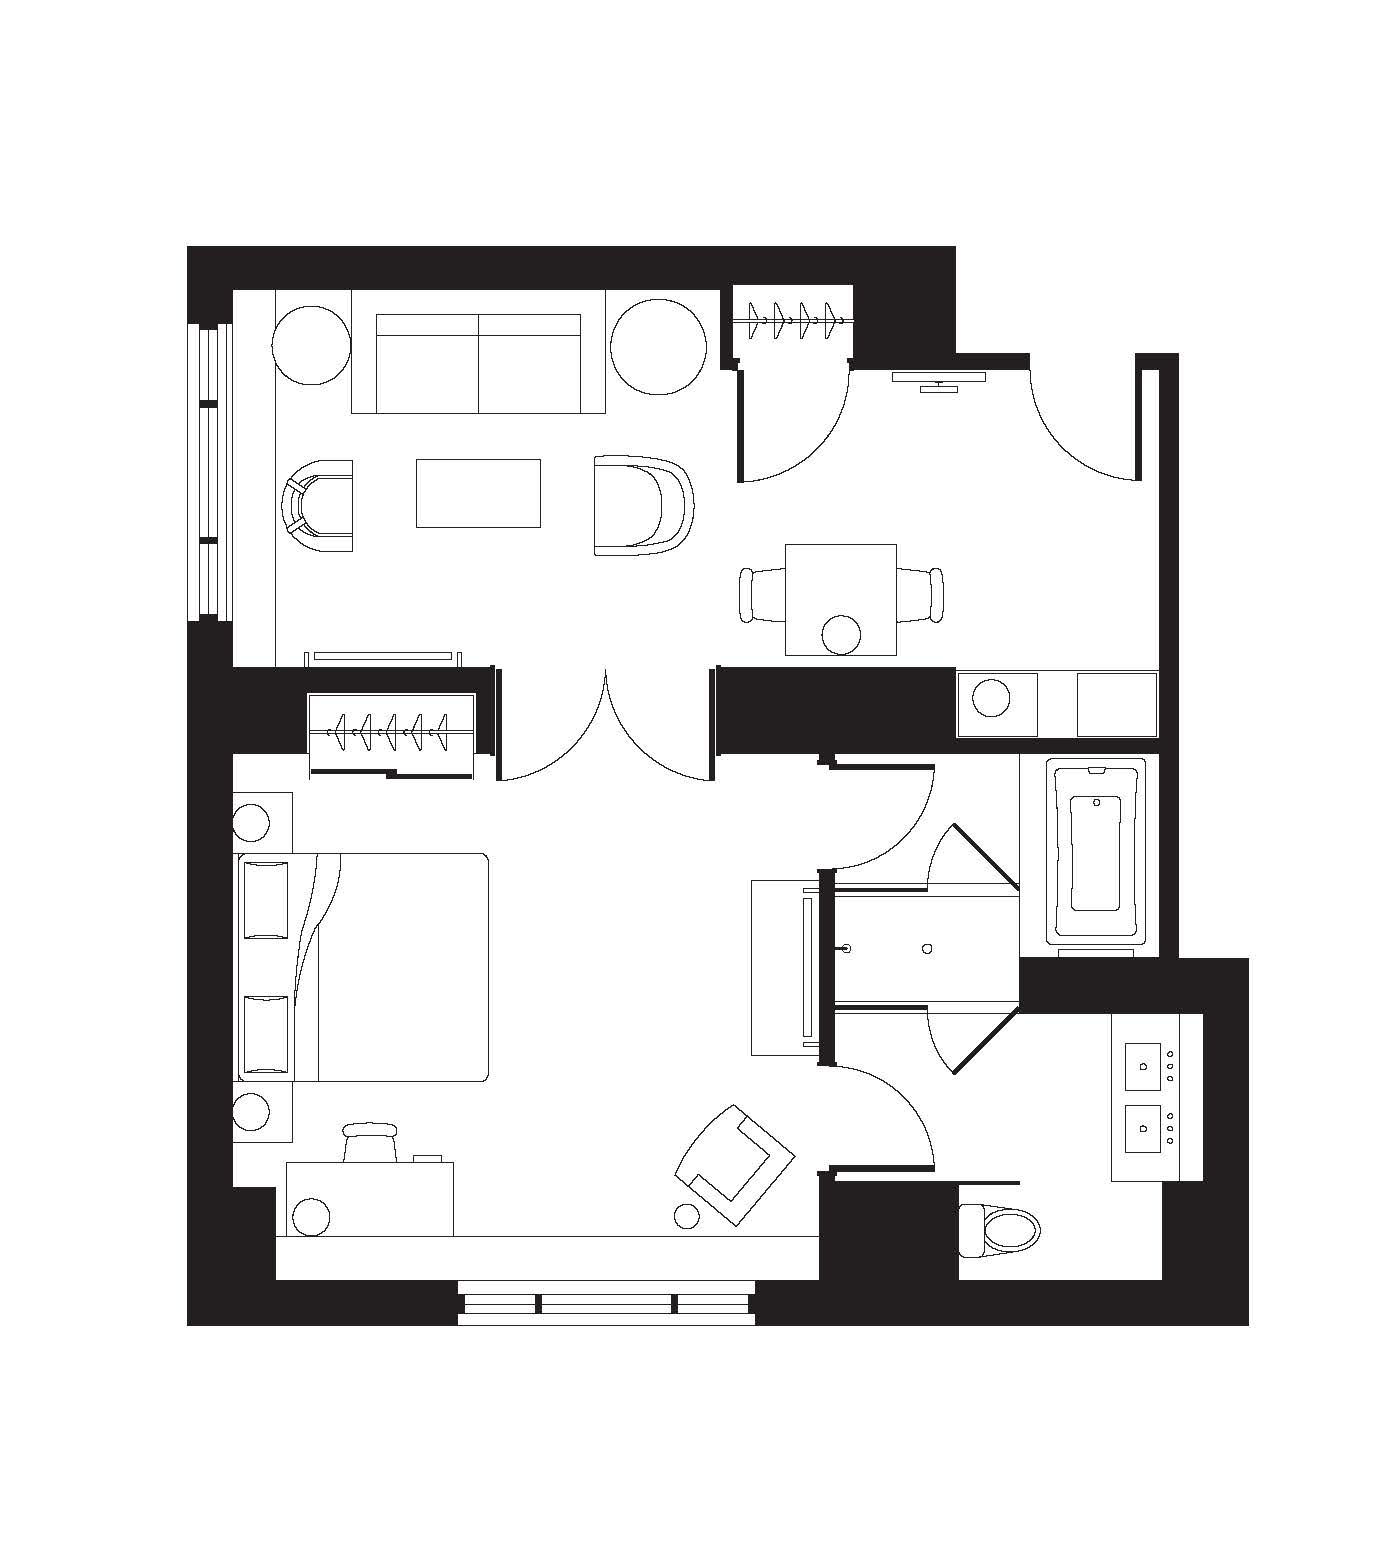 Floor Plan of the one bedroom Grand Suite at Soho Grand.